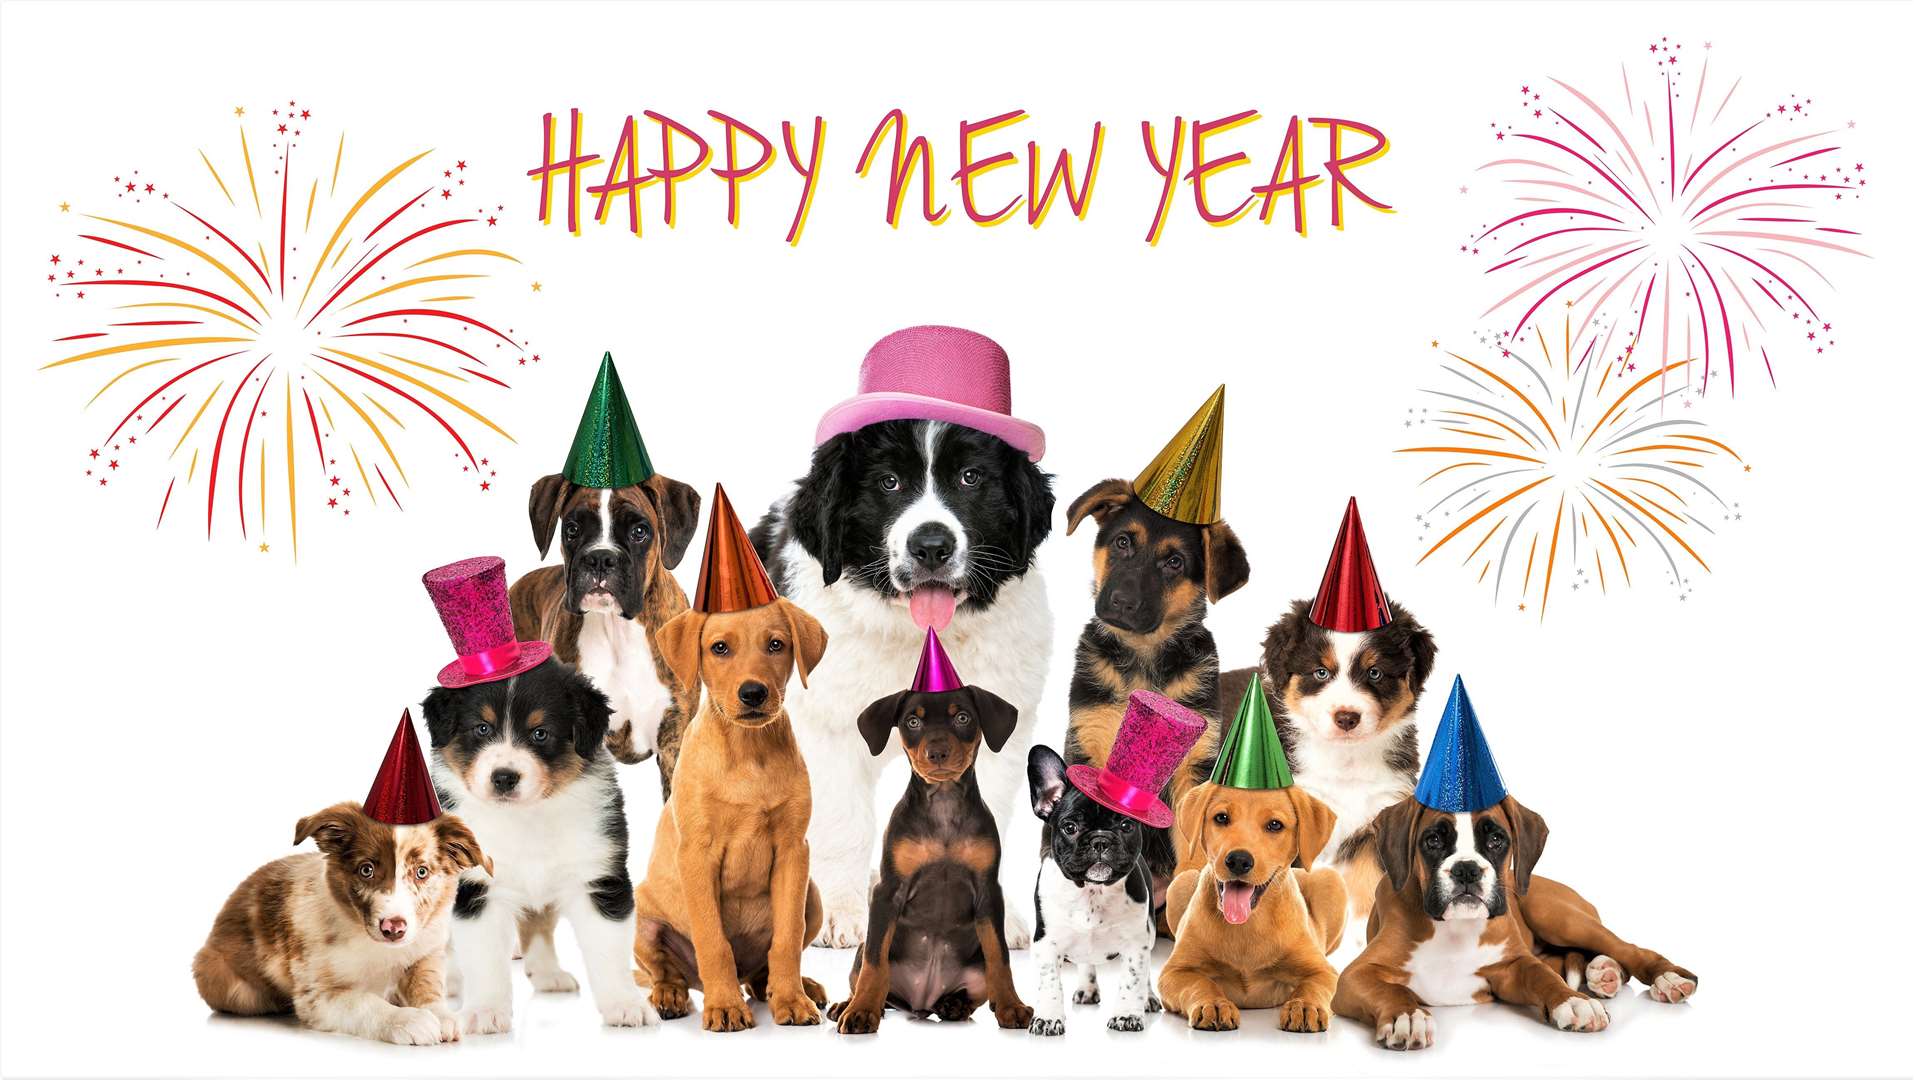 Dogs may not be as keen as humans in celebrating New Year.